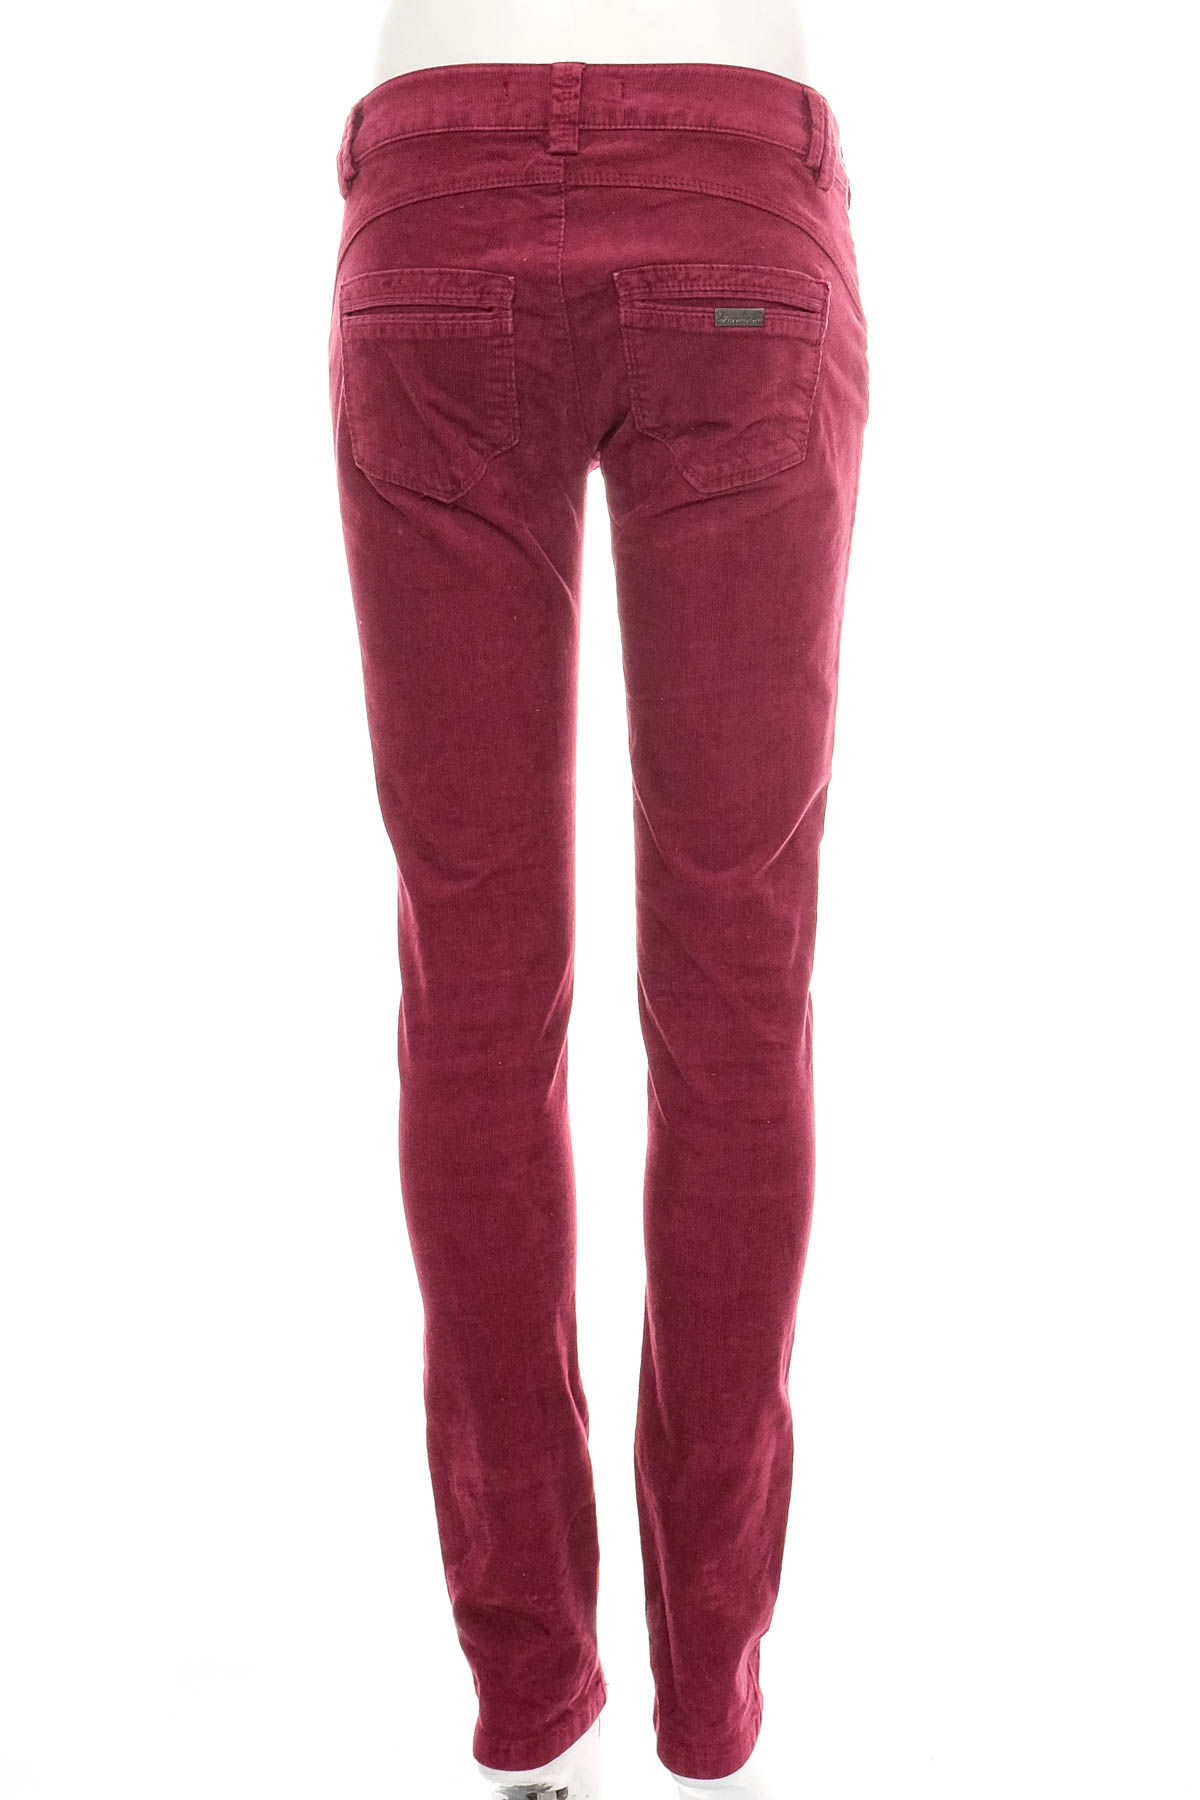 Women's trousers - Fornarina - 1